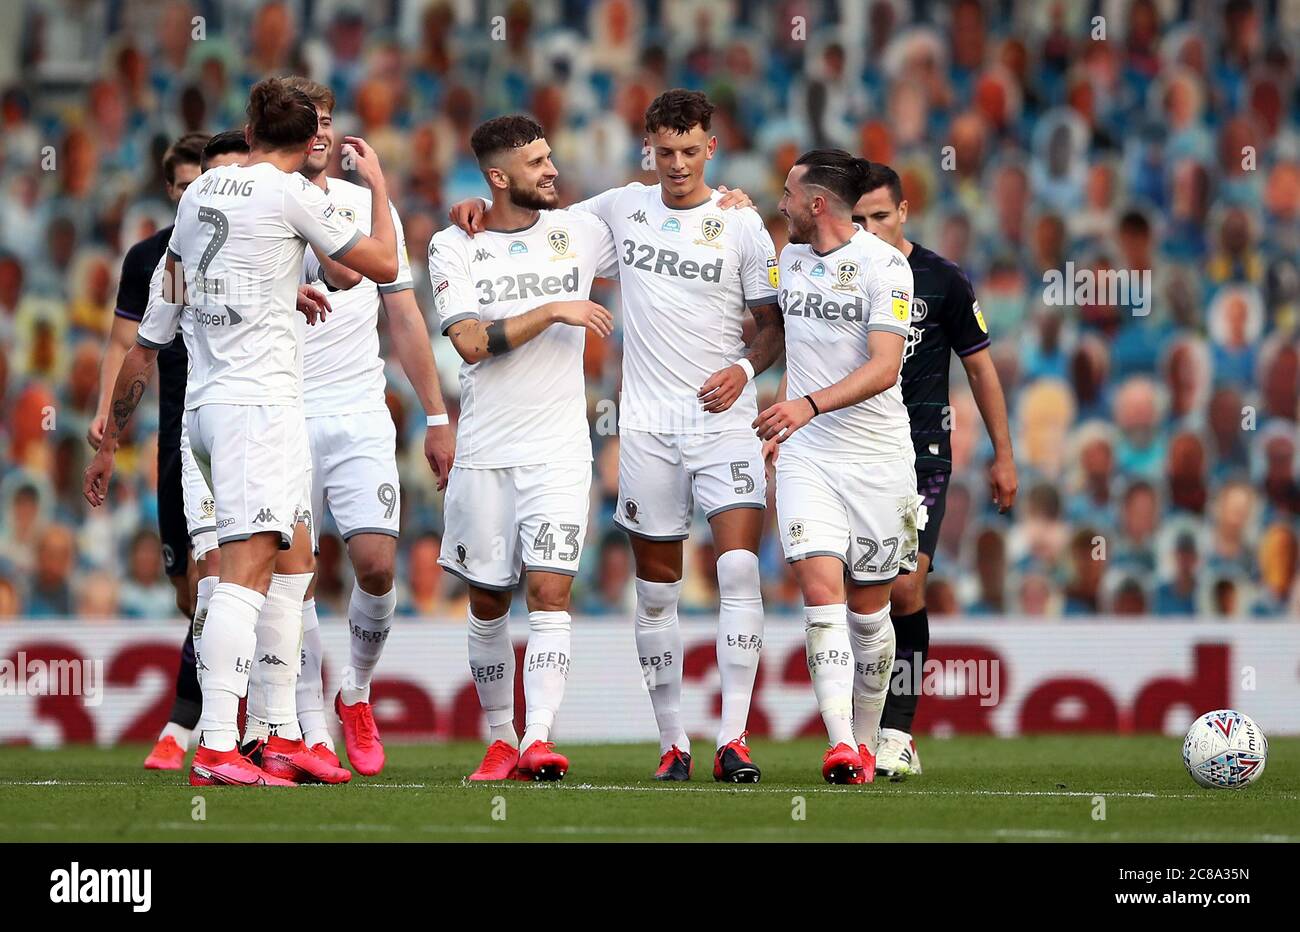 Leeds United's Ben White (no.5) celebrates scoring his side's first goal of the game with his team-mates during the Sky Bet Championship match at Elland Road, Leeds. Stock Photo